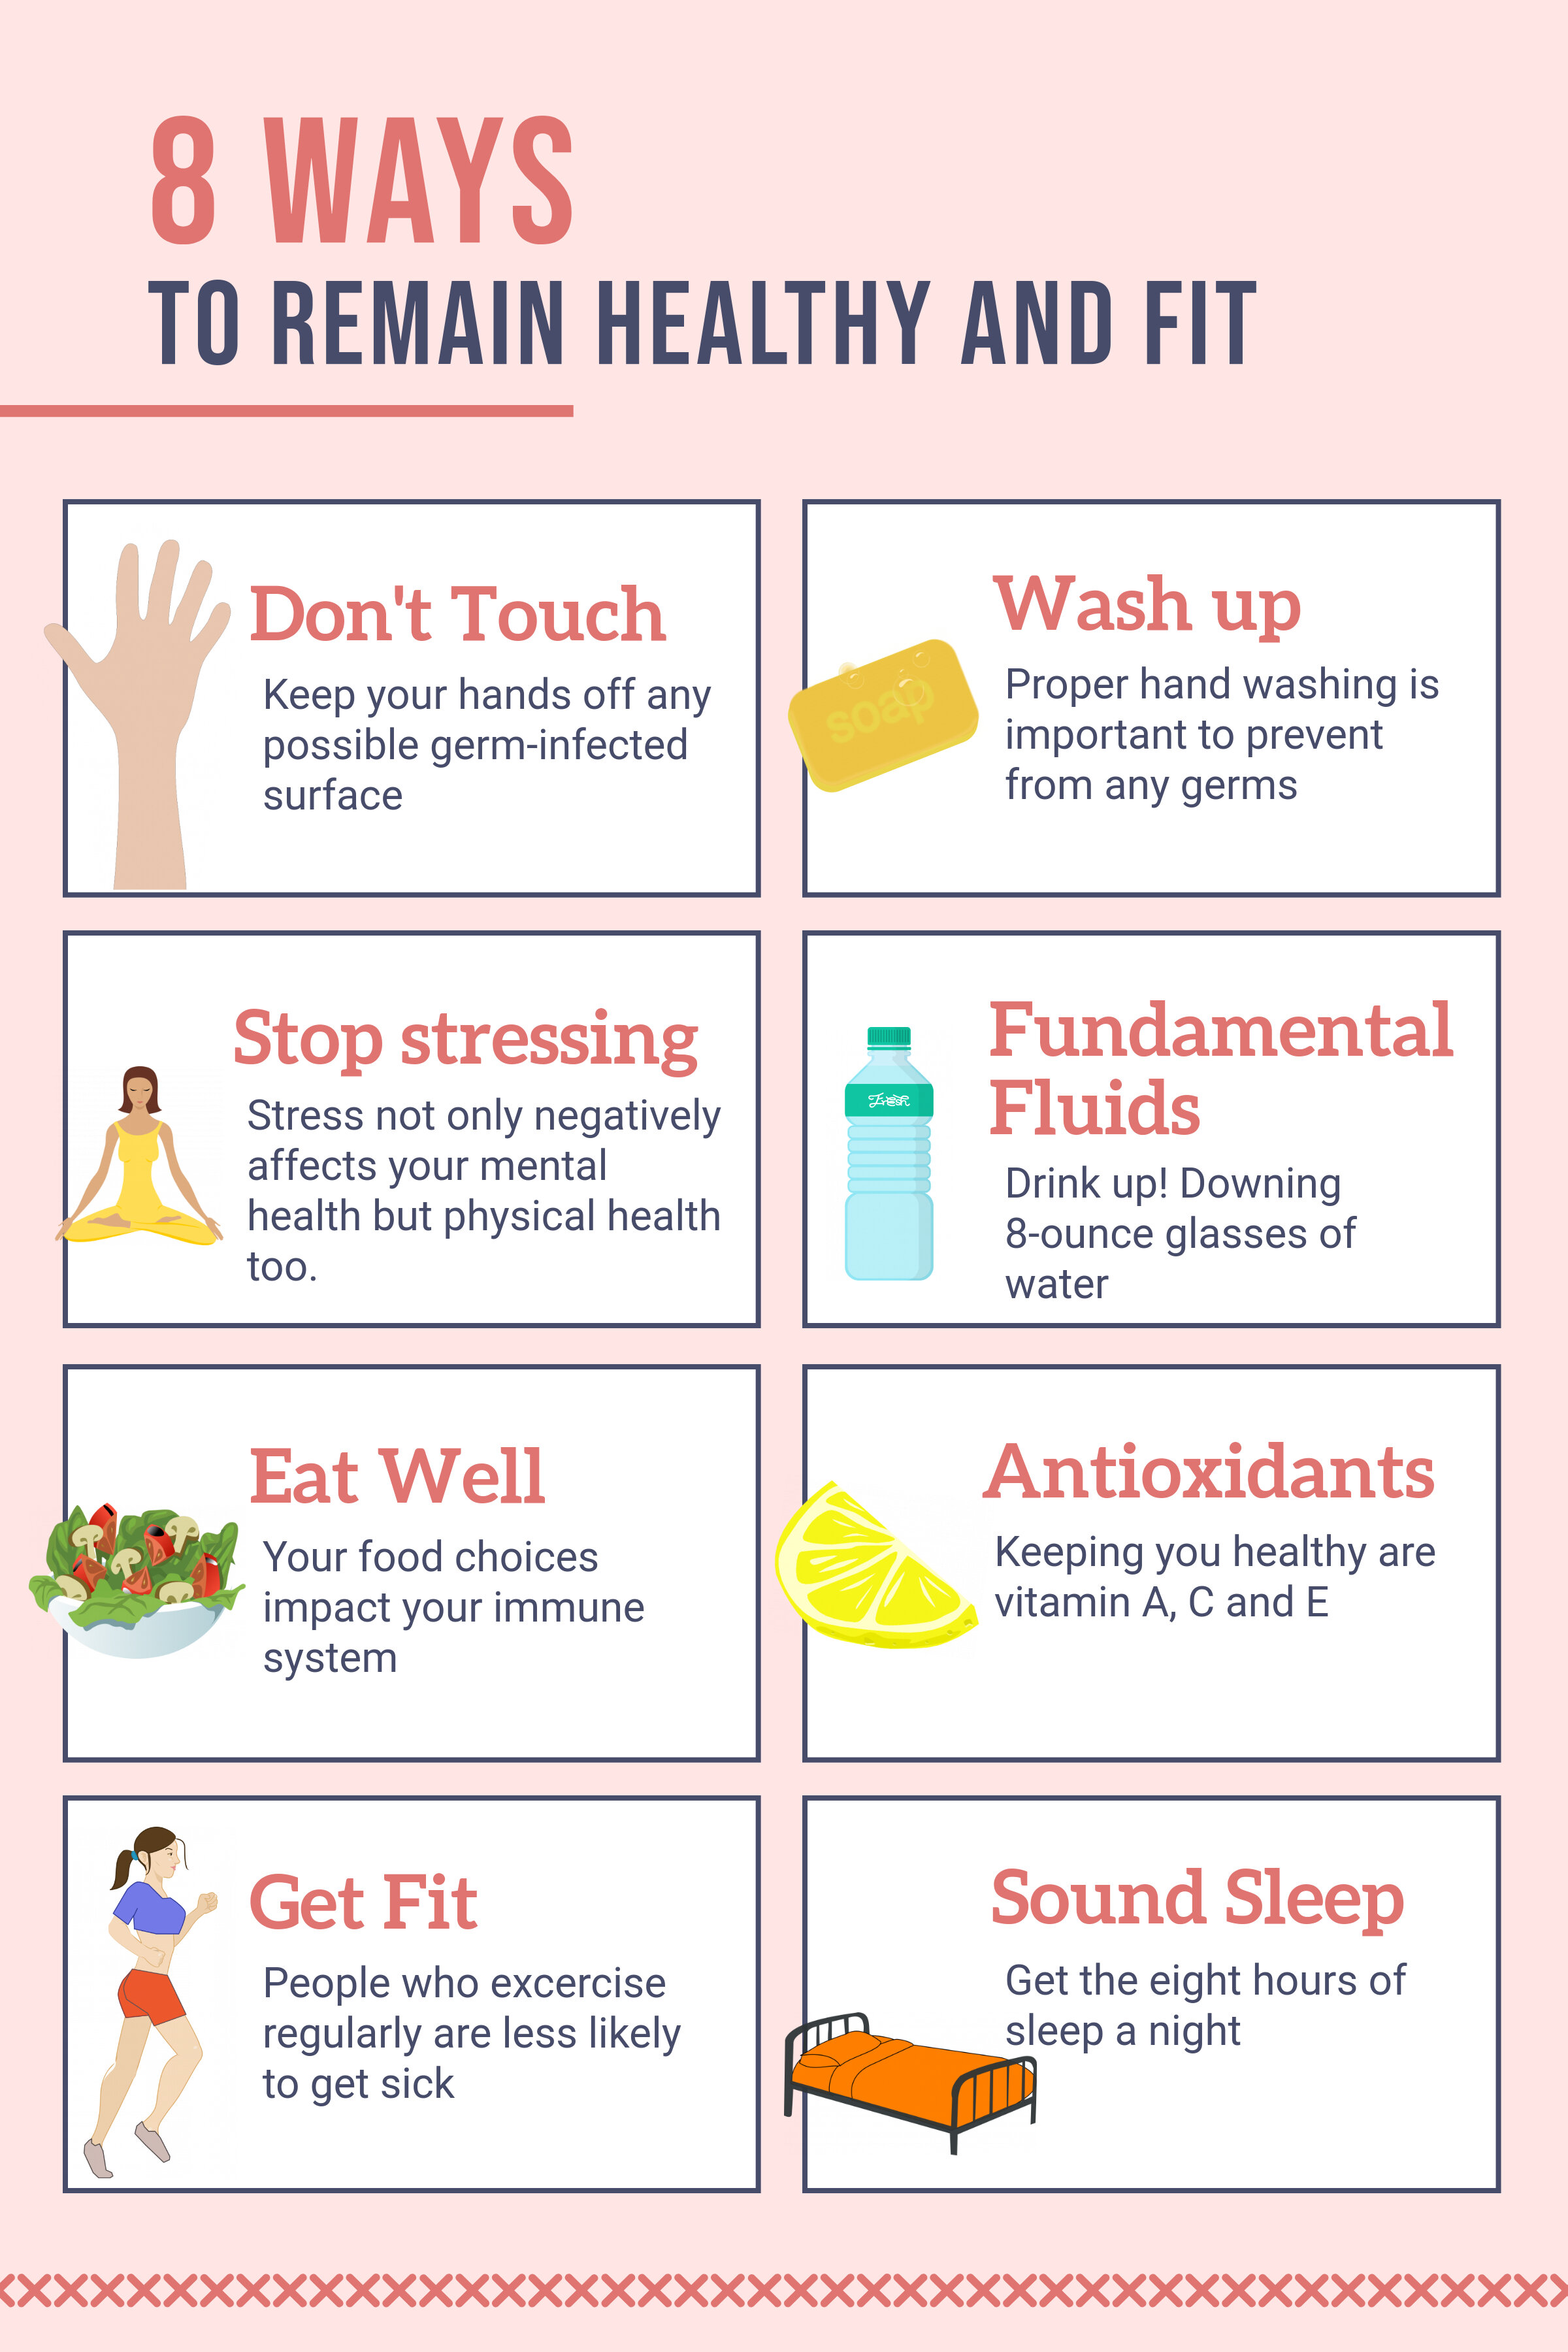 Copy of Ways to Stay Healthy and Fit Infographic.jpg